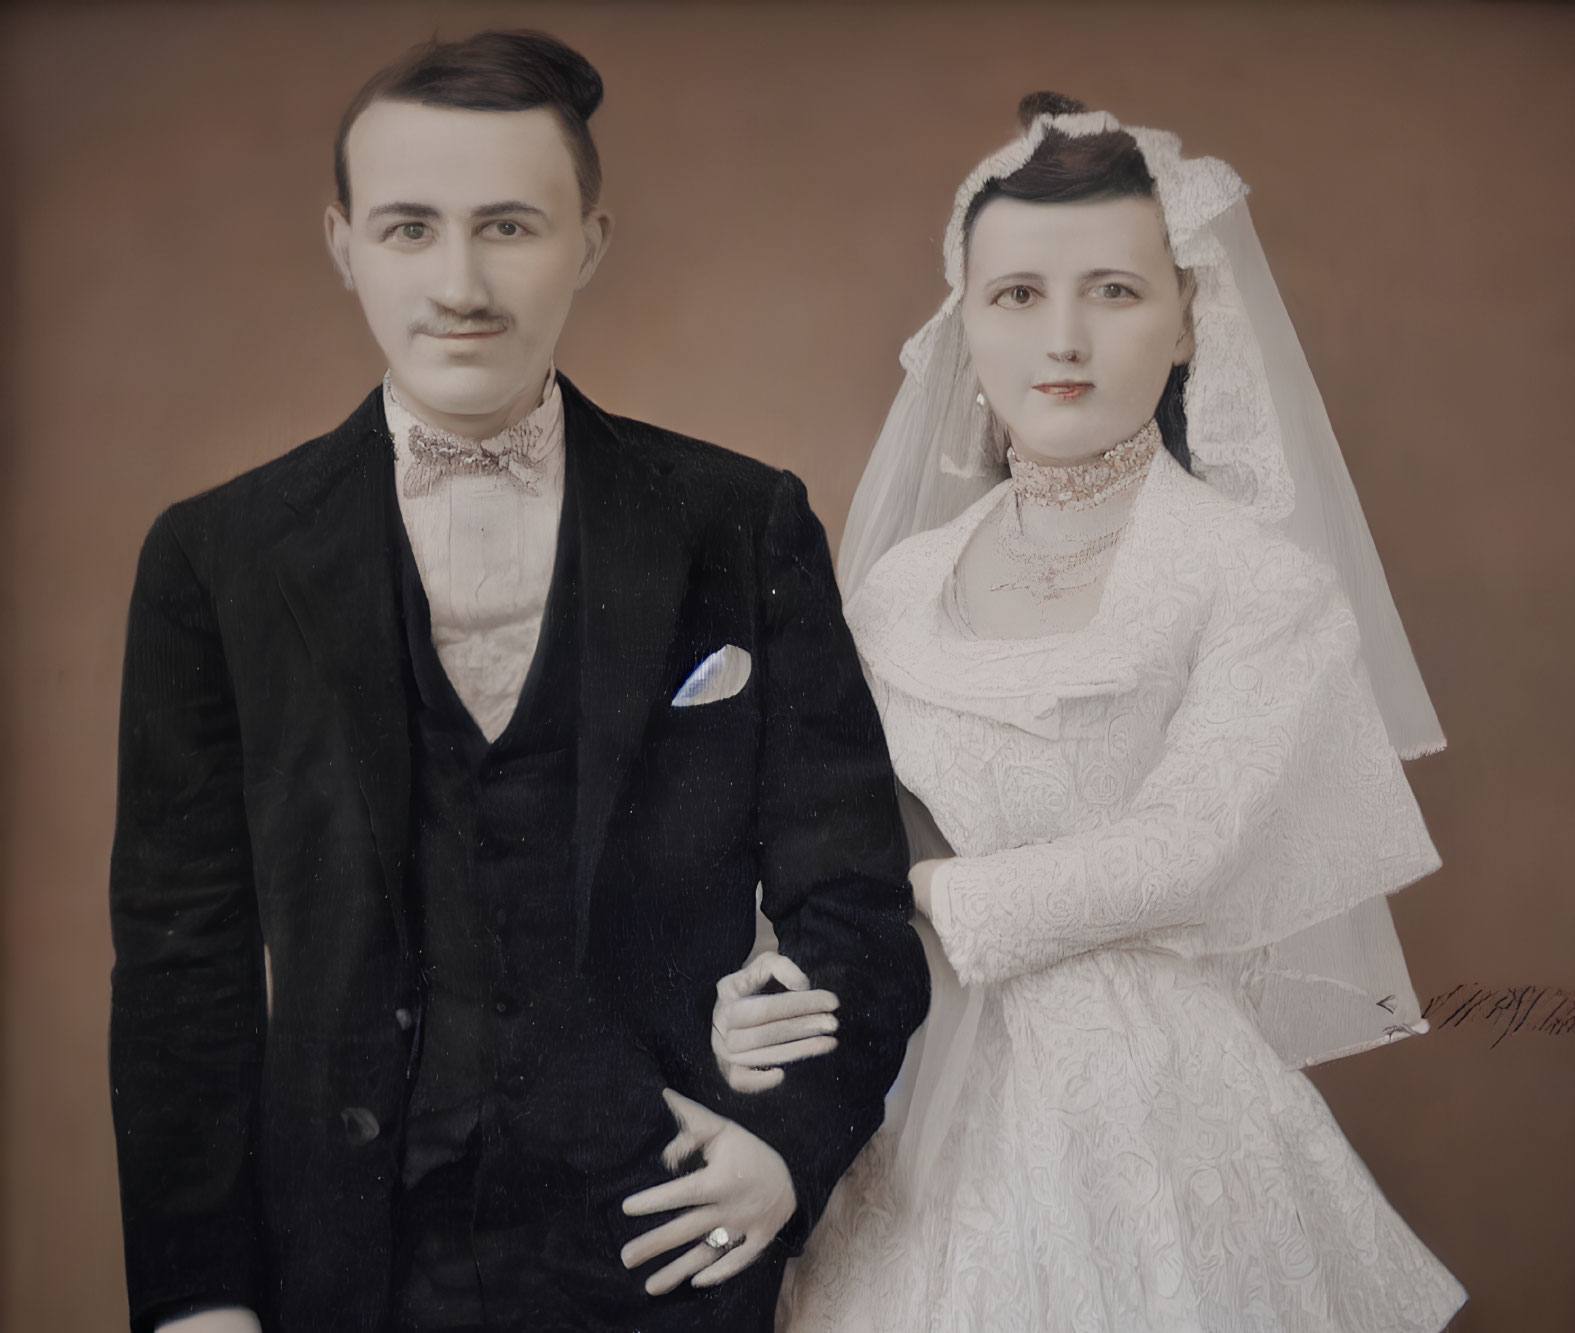 Classic Vintage Wedding Photo: Couple in Suit and White Gown